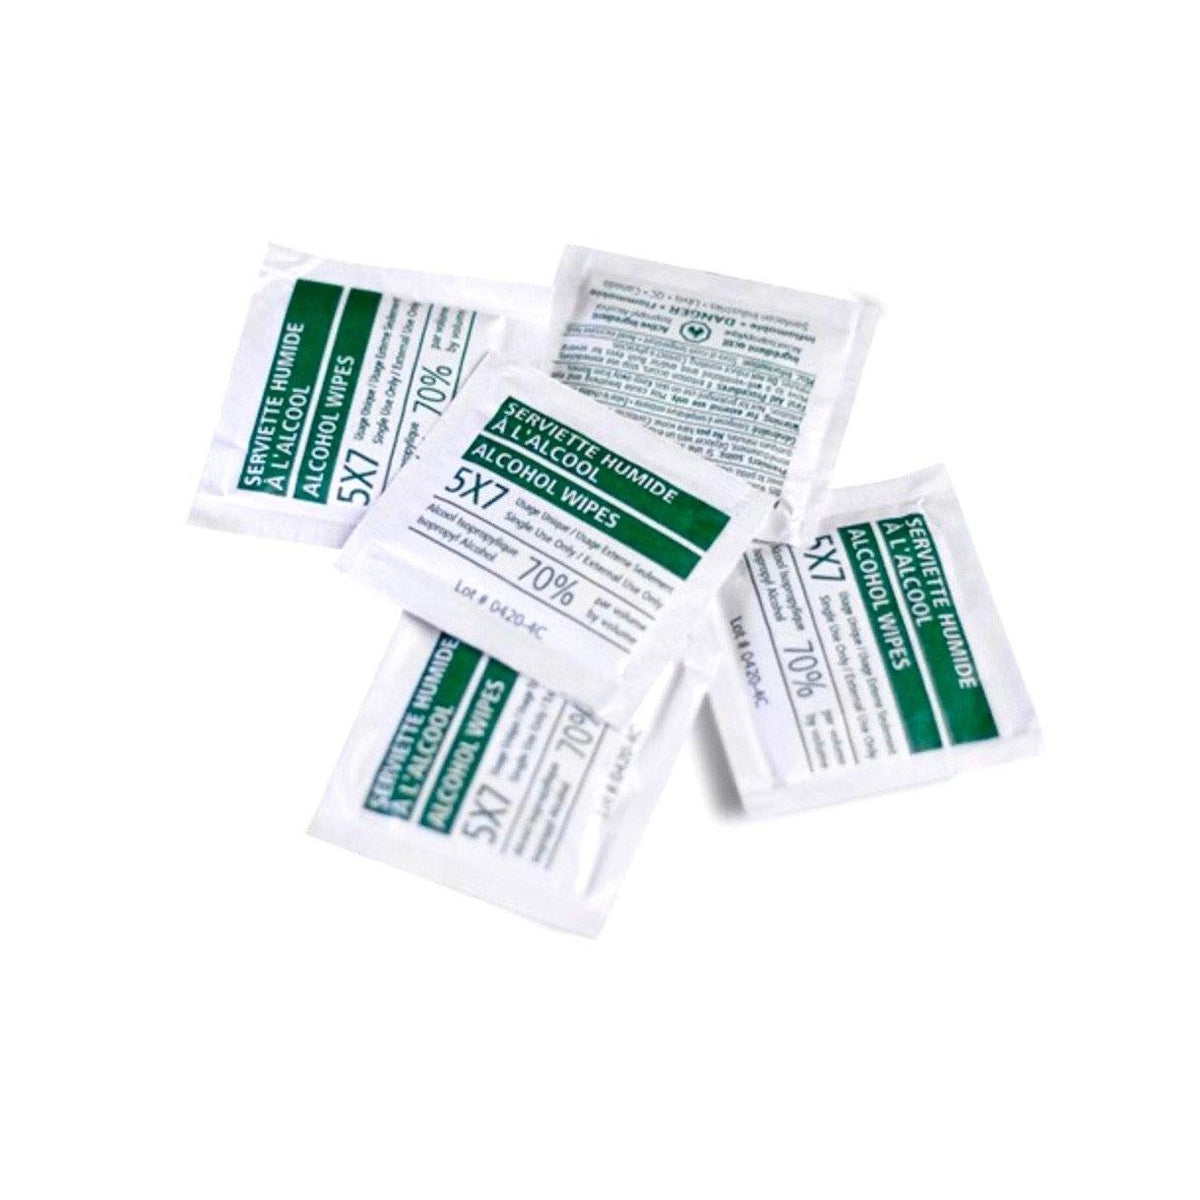 Alcohol Sani-Wipes (5x7 Inch) - The First Aid Gear Shop